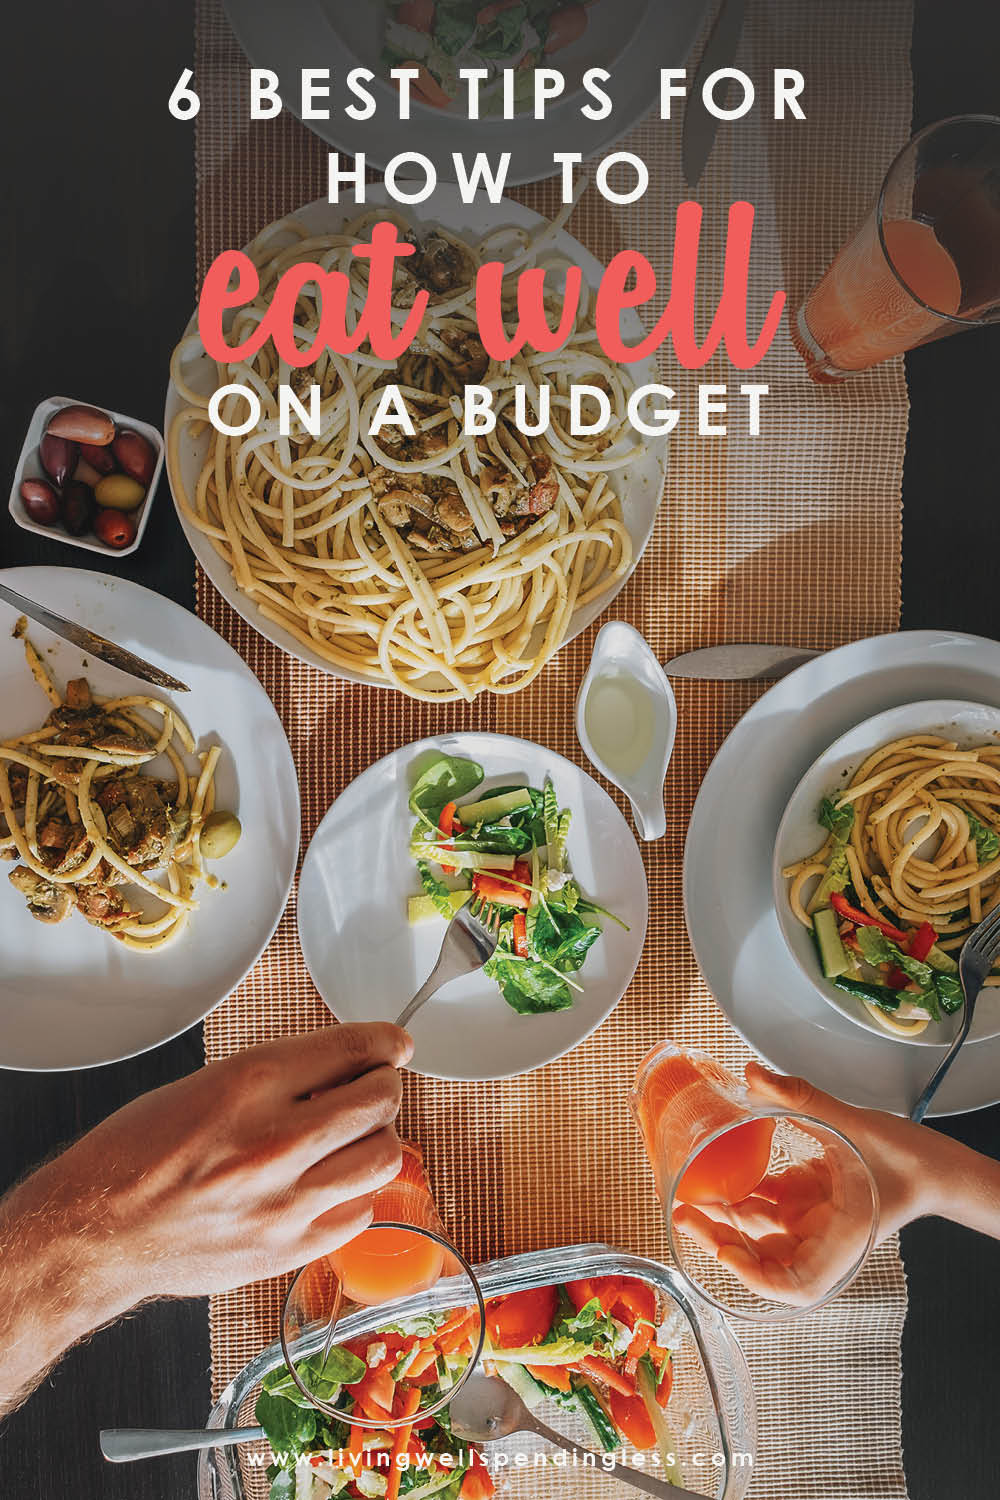 Think eating healthy has to cost a fortune? These tips for how to eat well on a budget will shed some light on nutritious meals the whole family will love! #healthfuleating #eatingonabudget #mealsavingtips #moneysavingtips #grocery #affordableeating #grocerymoneysavingtips #eatwell #grocerybudgettips